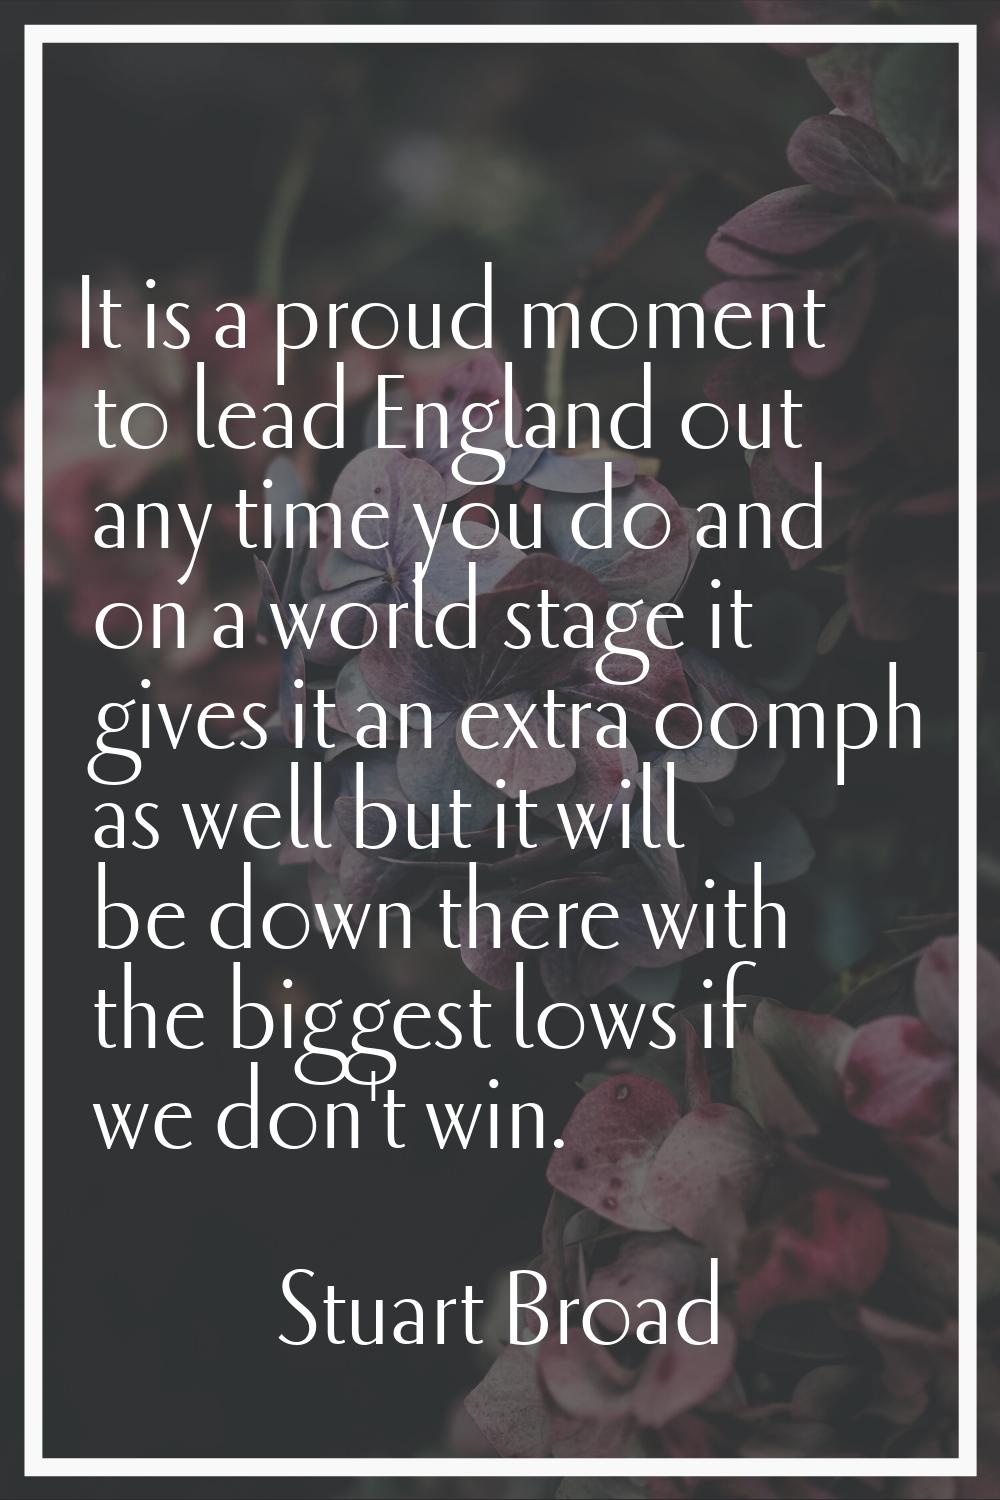 It is a proud moment to lead England out any time you do and on a world stage it gives it an extra 